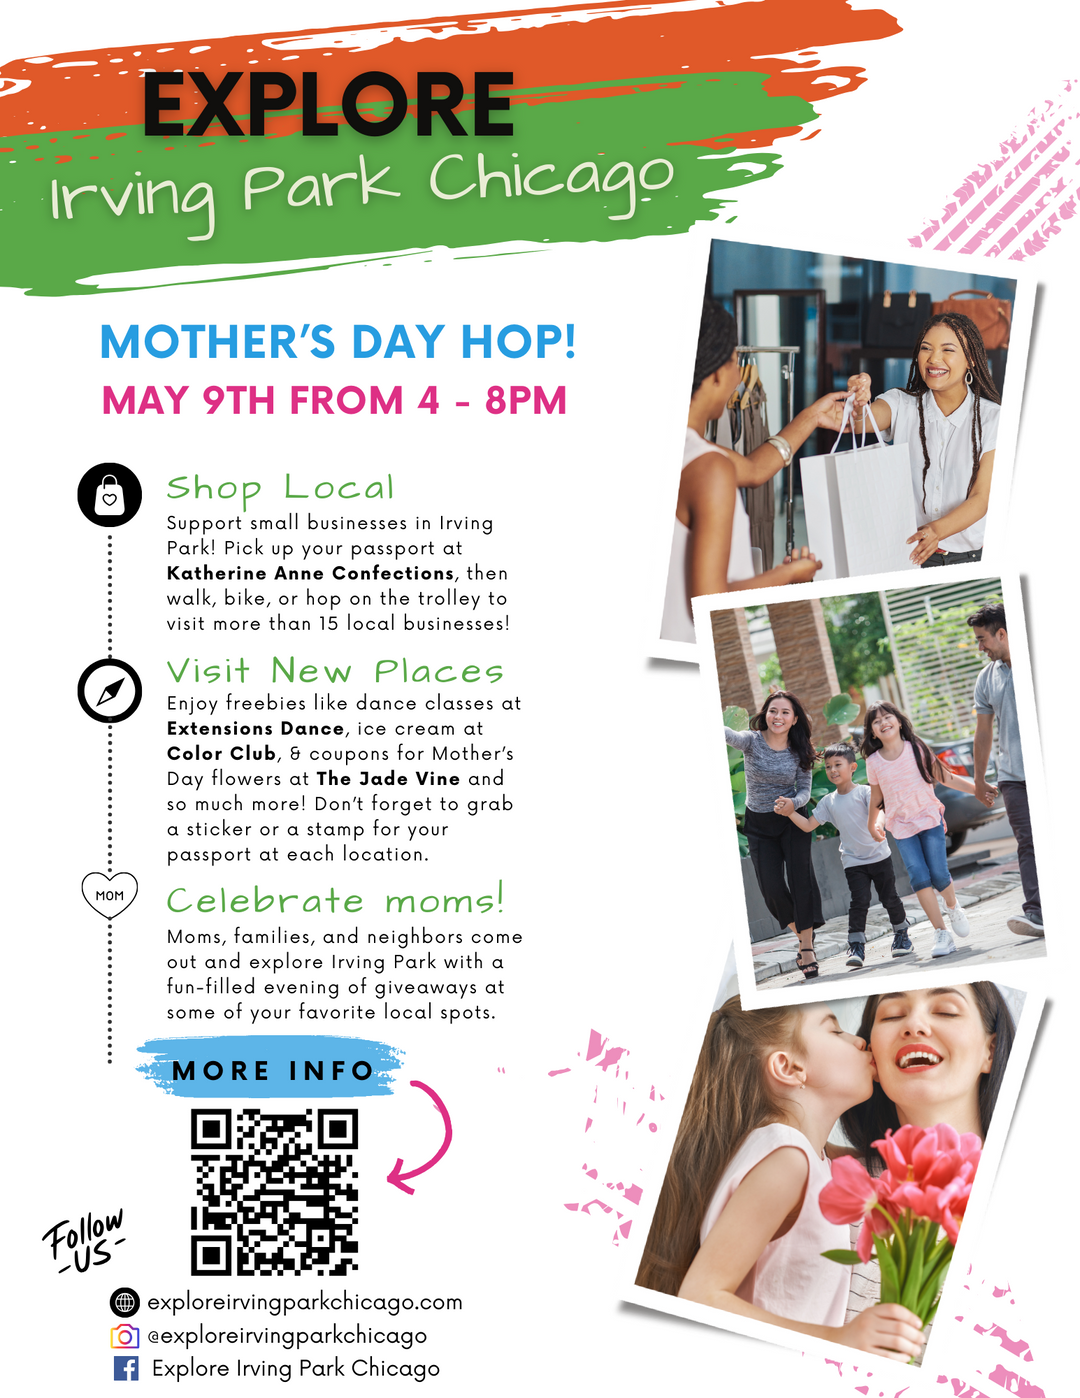 EIPC Mother's Day Trolley Hop